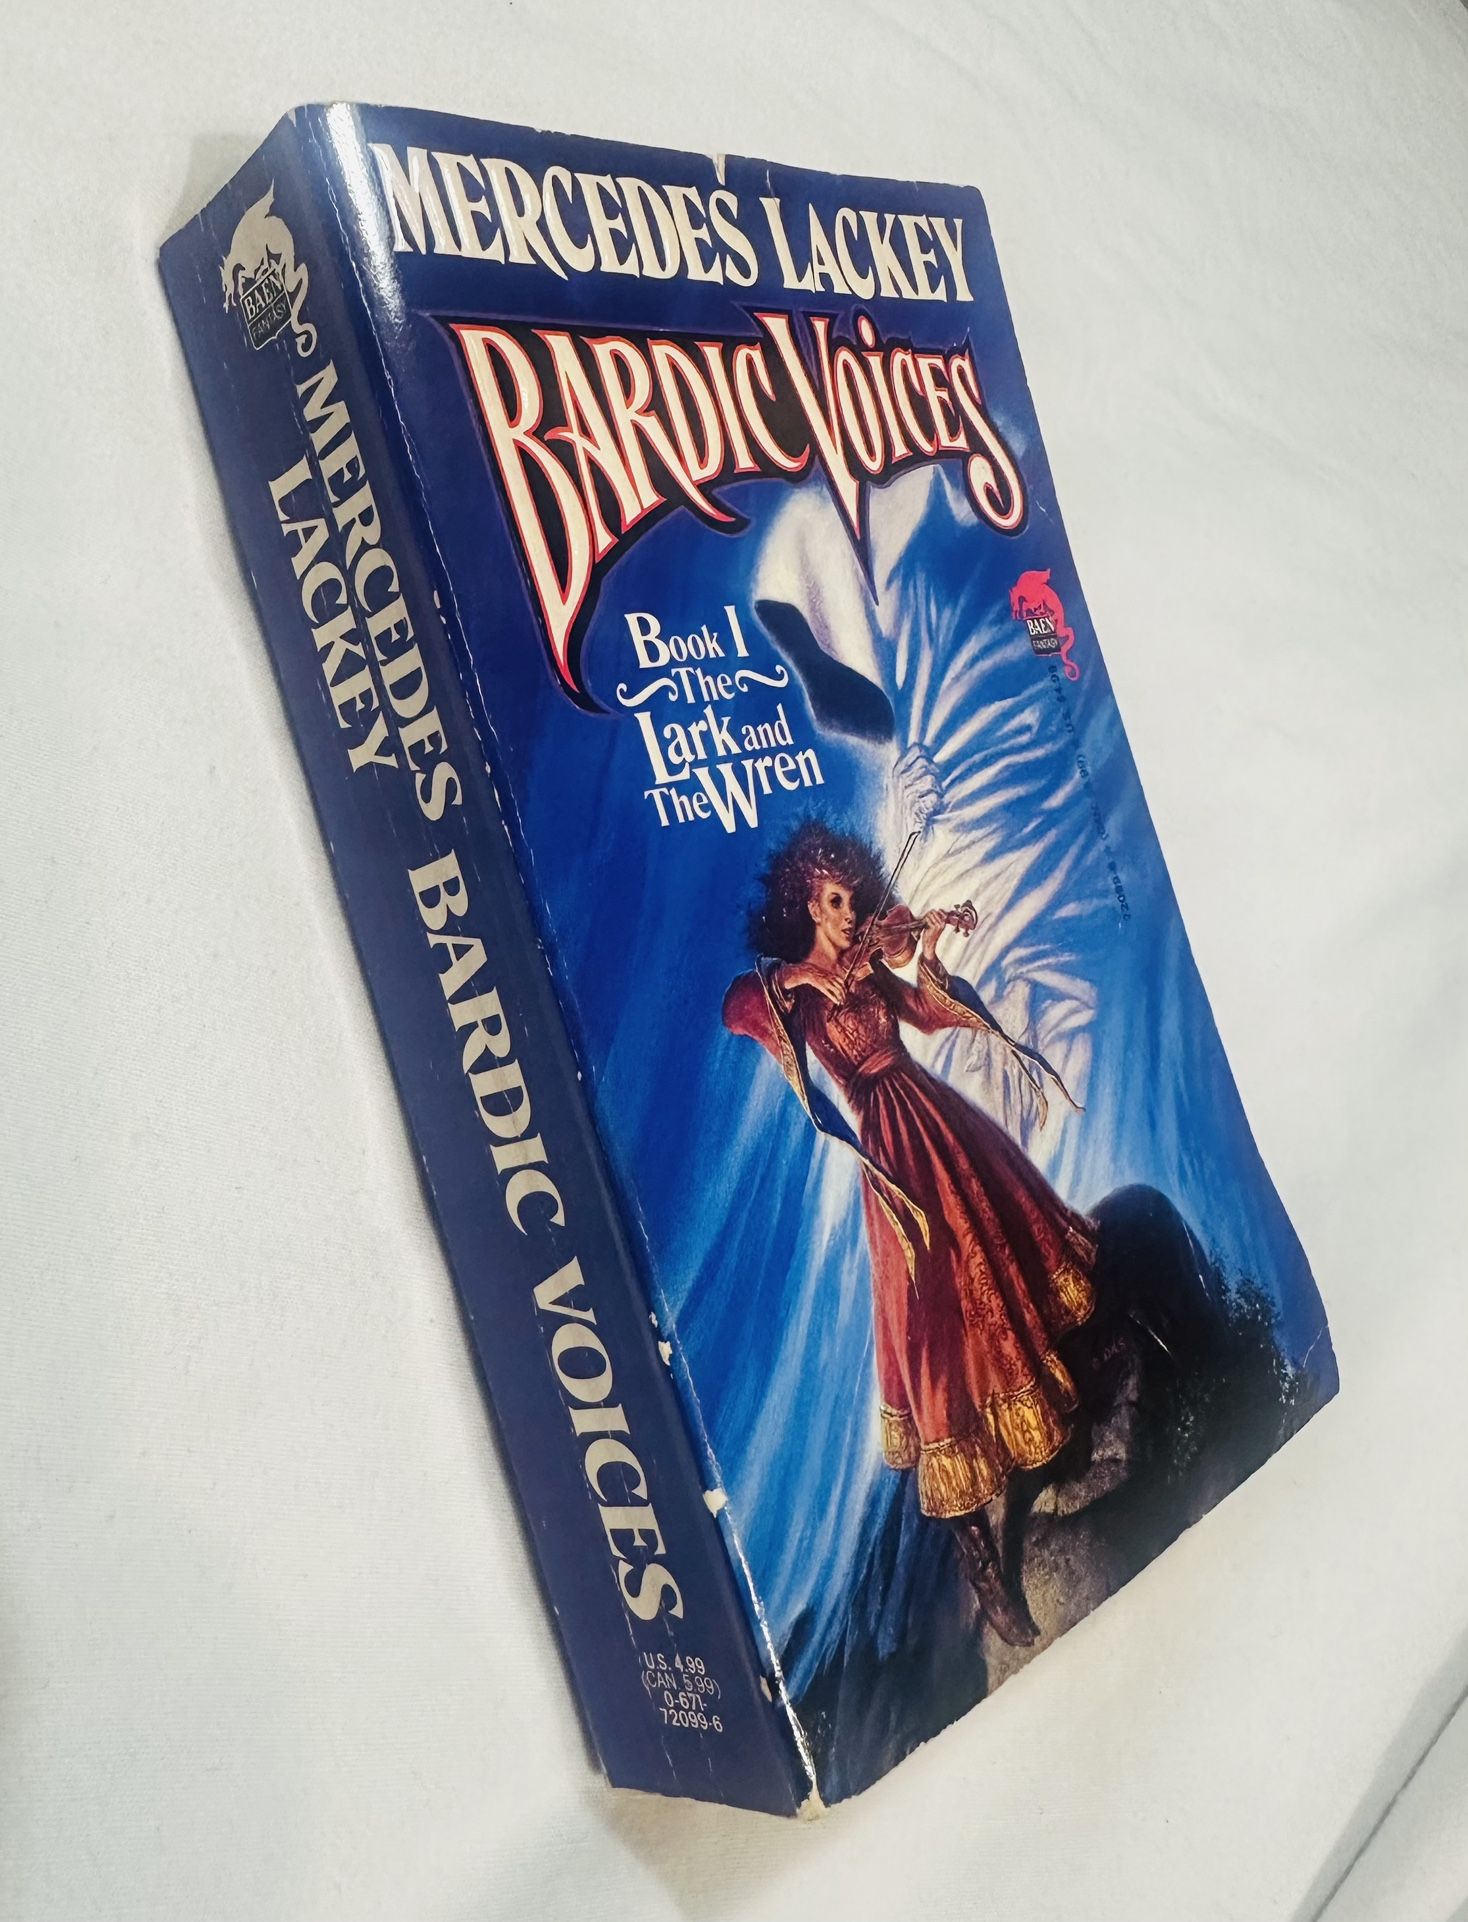 Vintage 1992, First Printing. Bardic Voices: Book 1, The Lark and the Wren by Mercedes Lackey. 